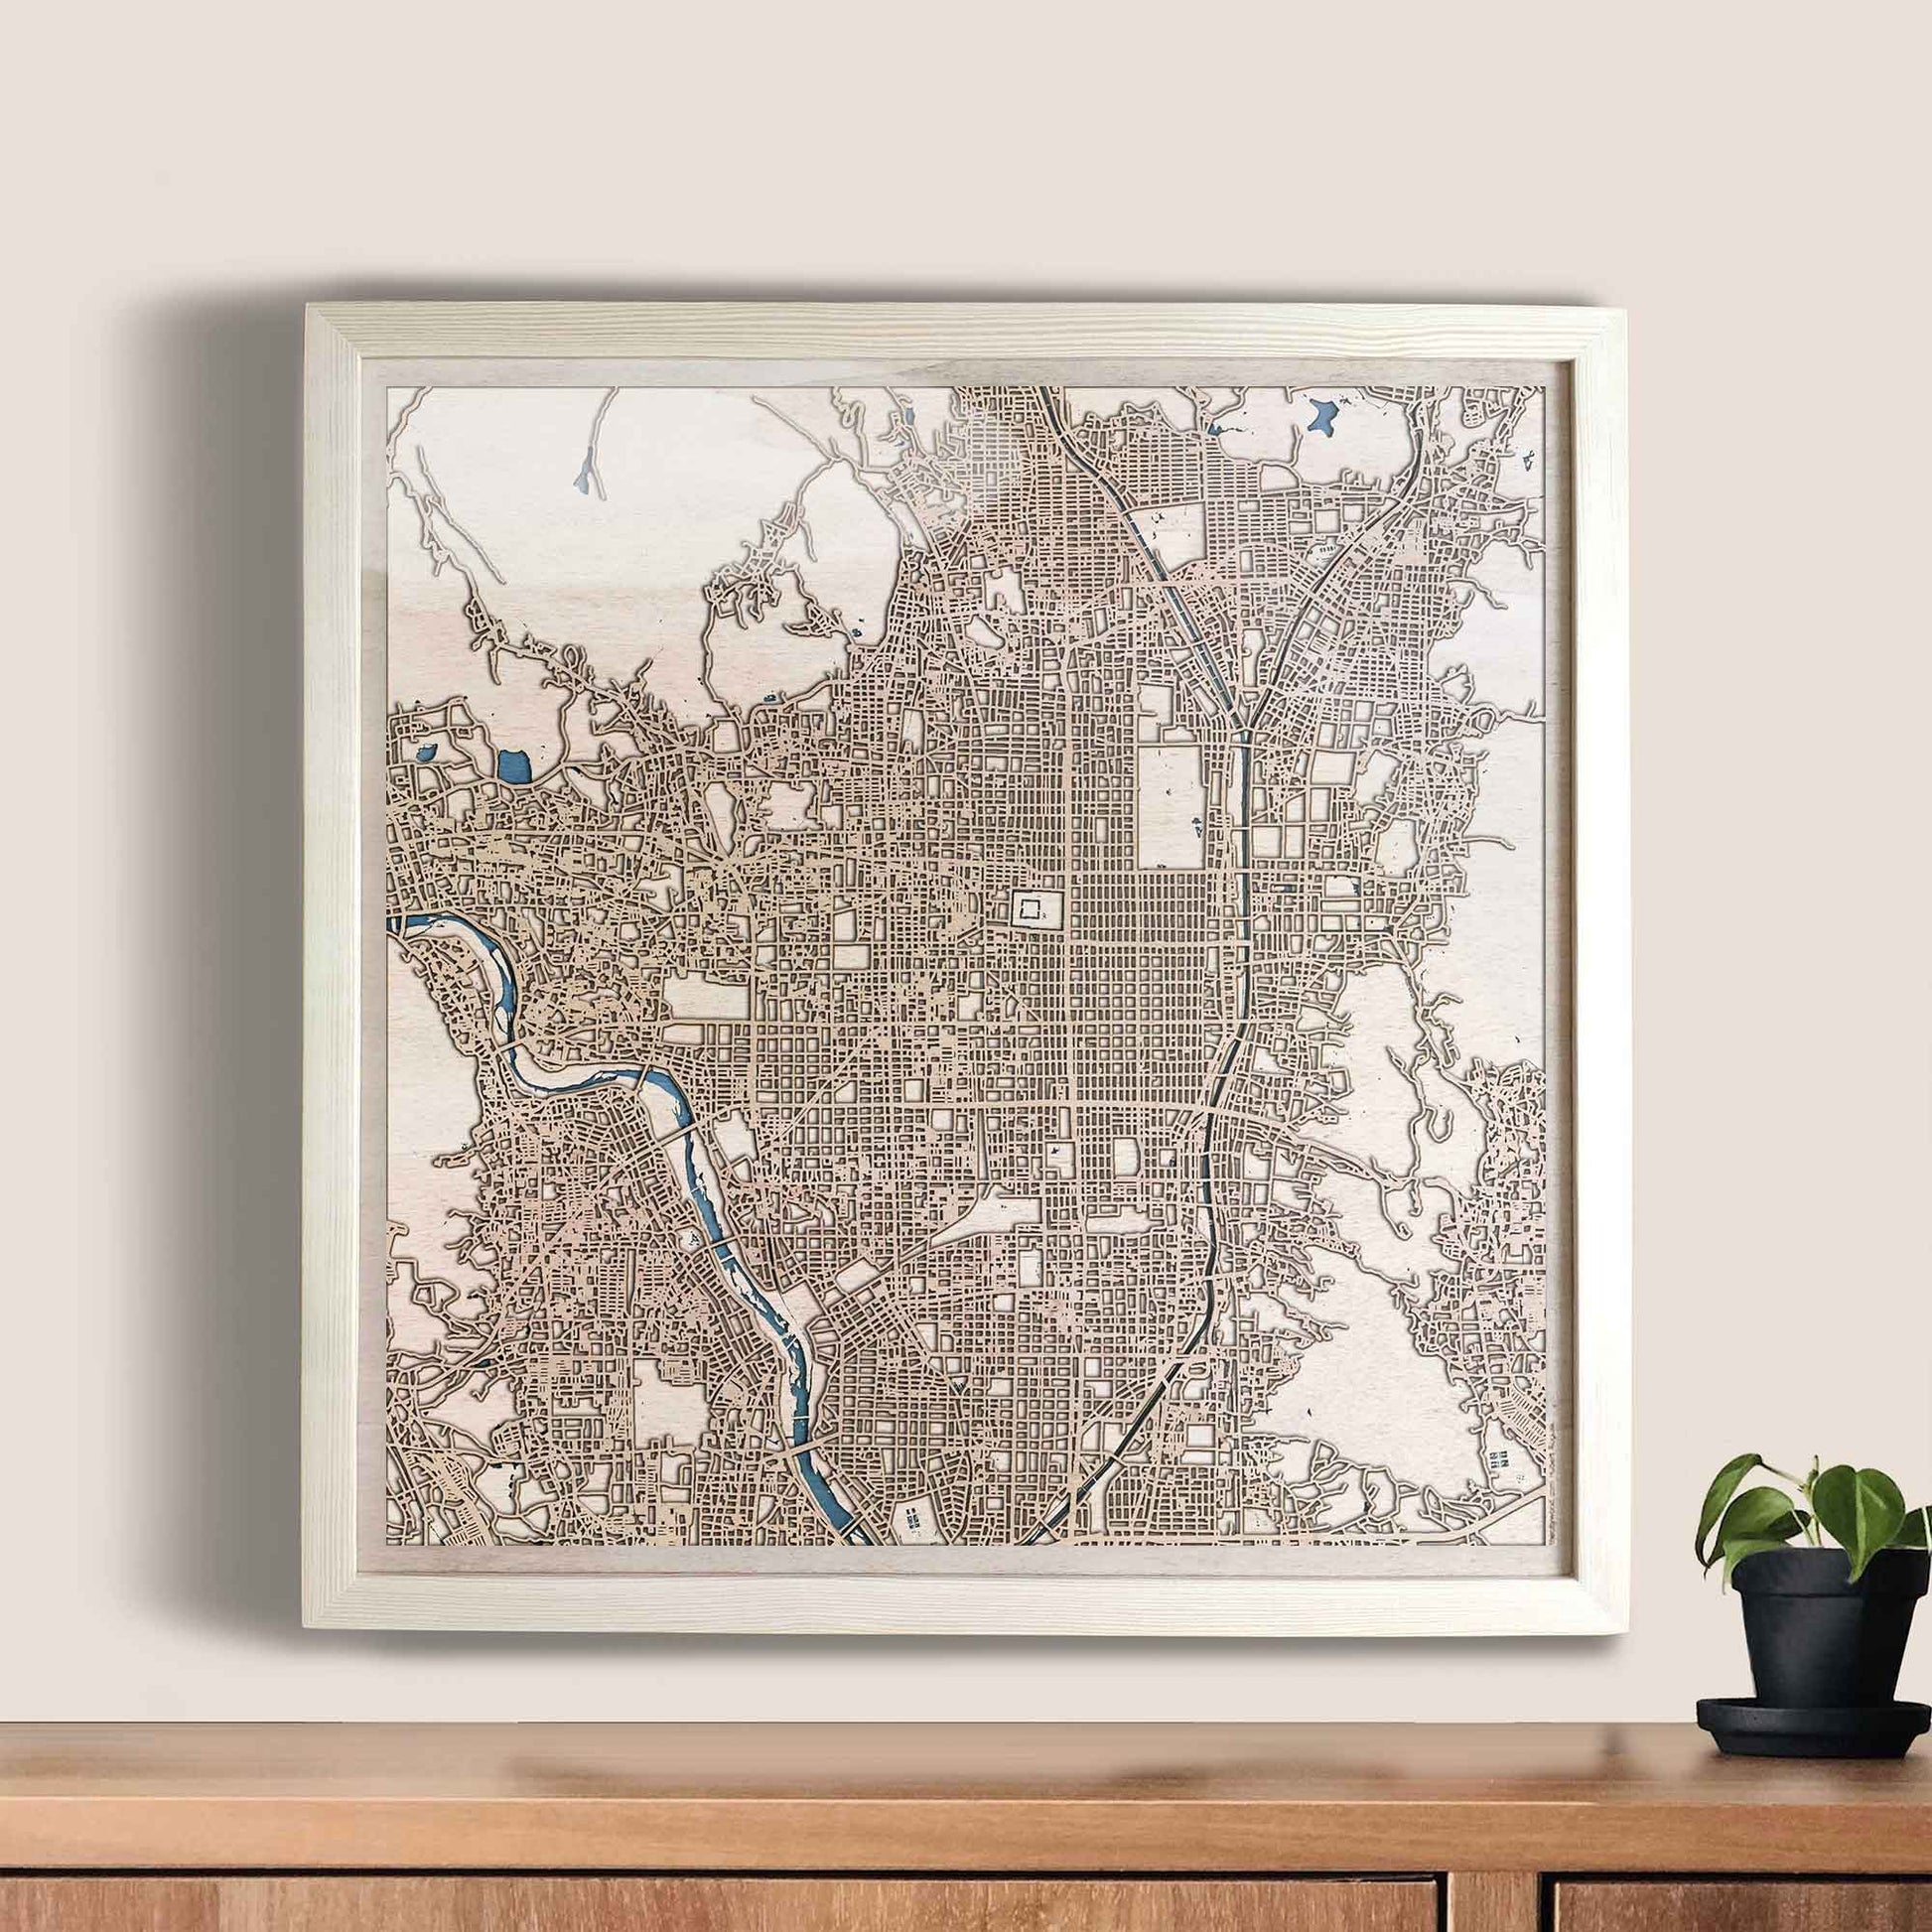 Kyoto Wooden Map by CityWood - Custom Wood Map Art - Unique Laser Cut Engraved - Anniversary Gift